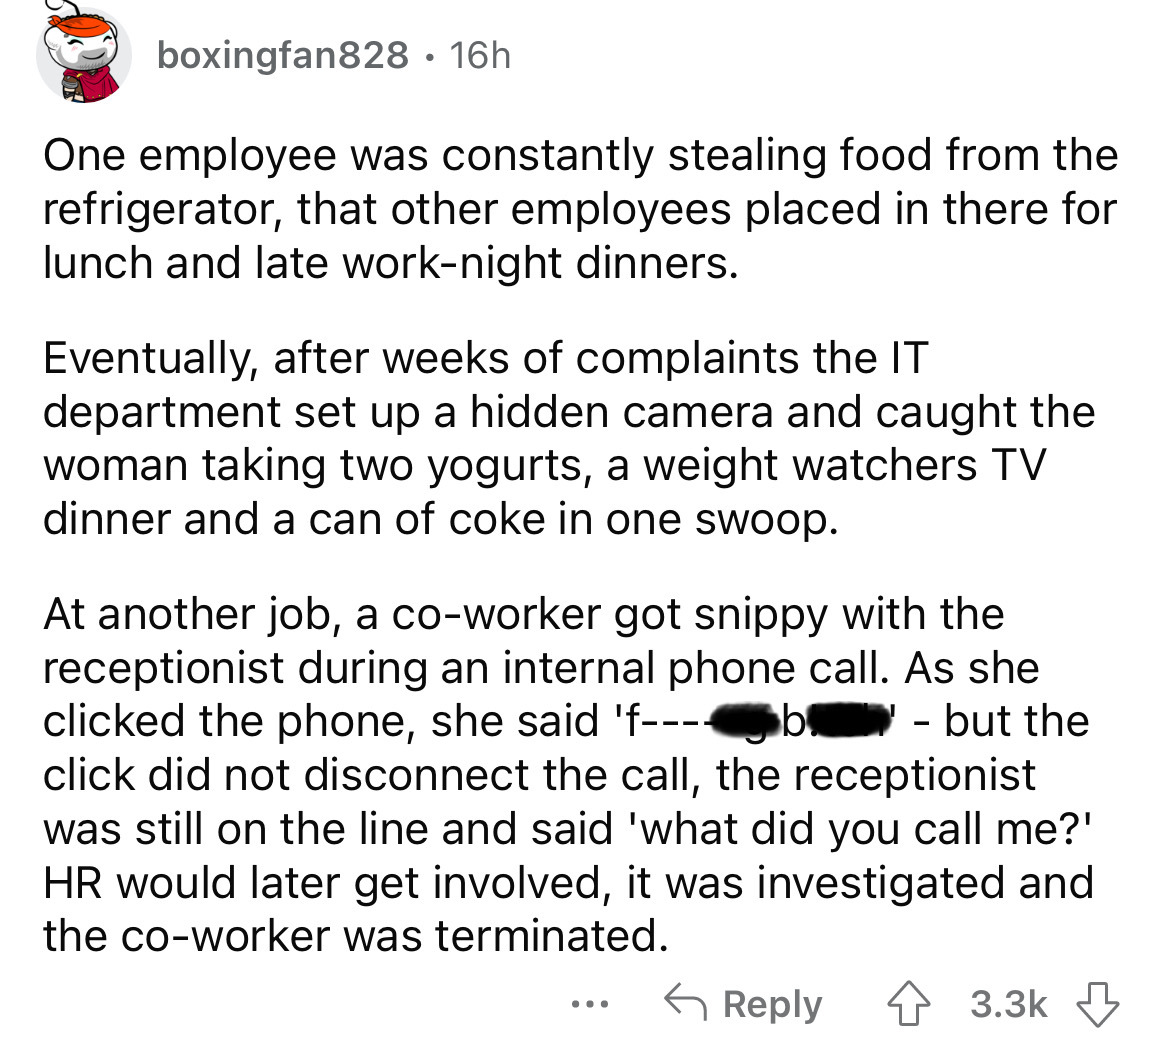 number - boxingfan828.16h One employee was constantly stealing food from the refrigerator, that other employees placed in there for lunch and late worknight dinners. Eventually, after weeks of complaints the It department set up a hidden camera and caught